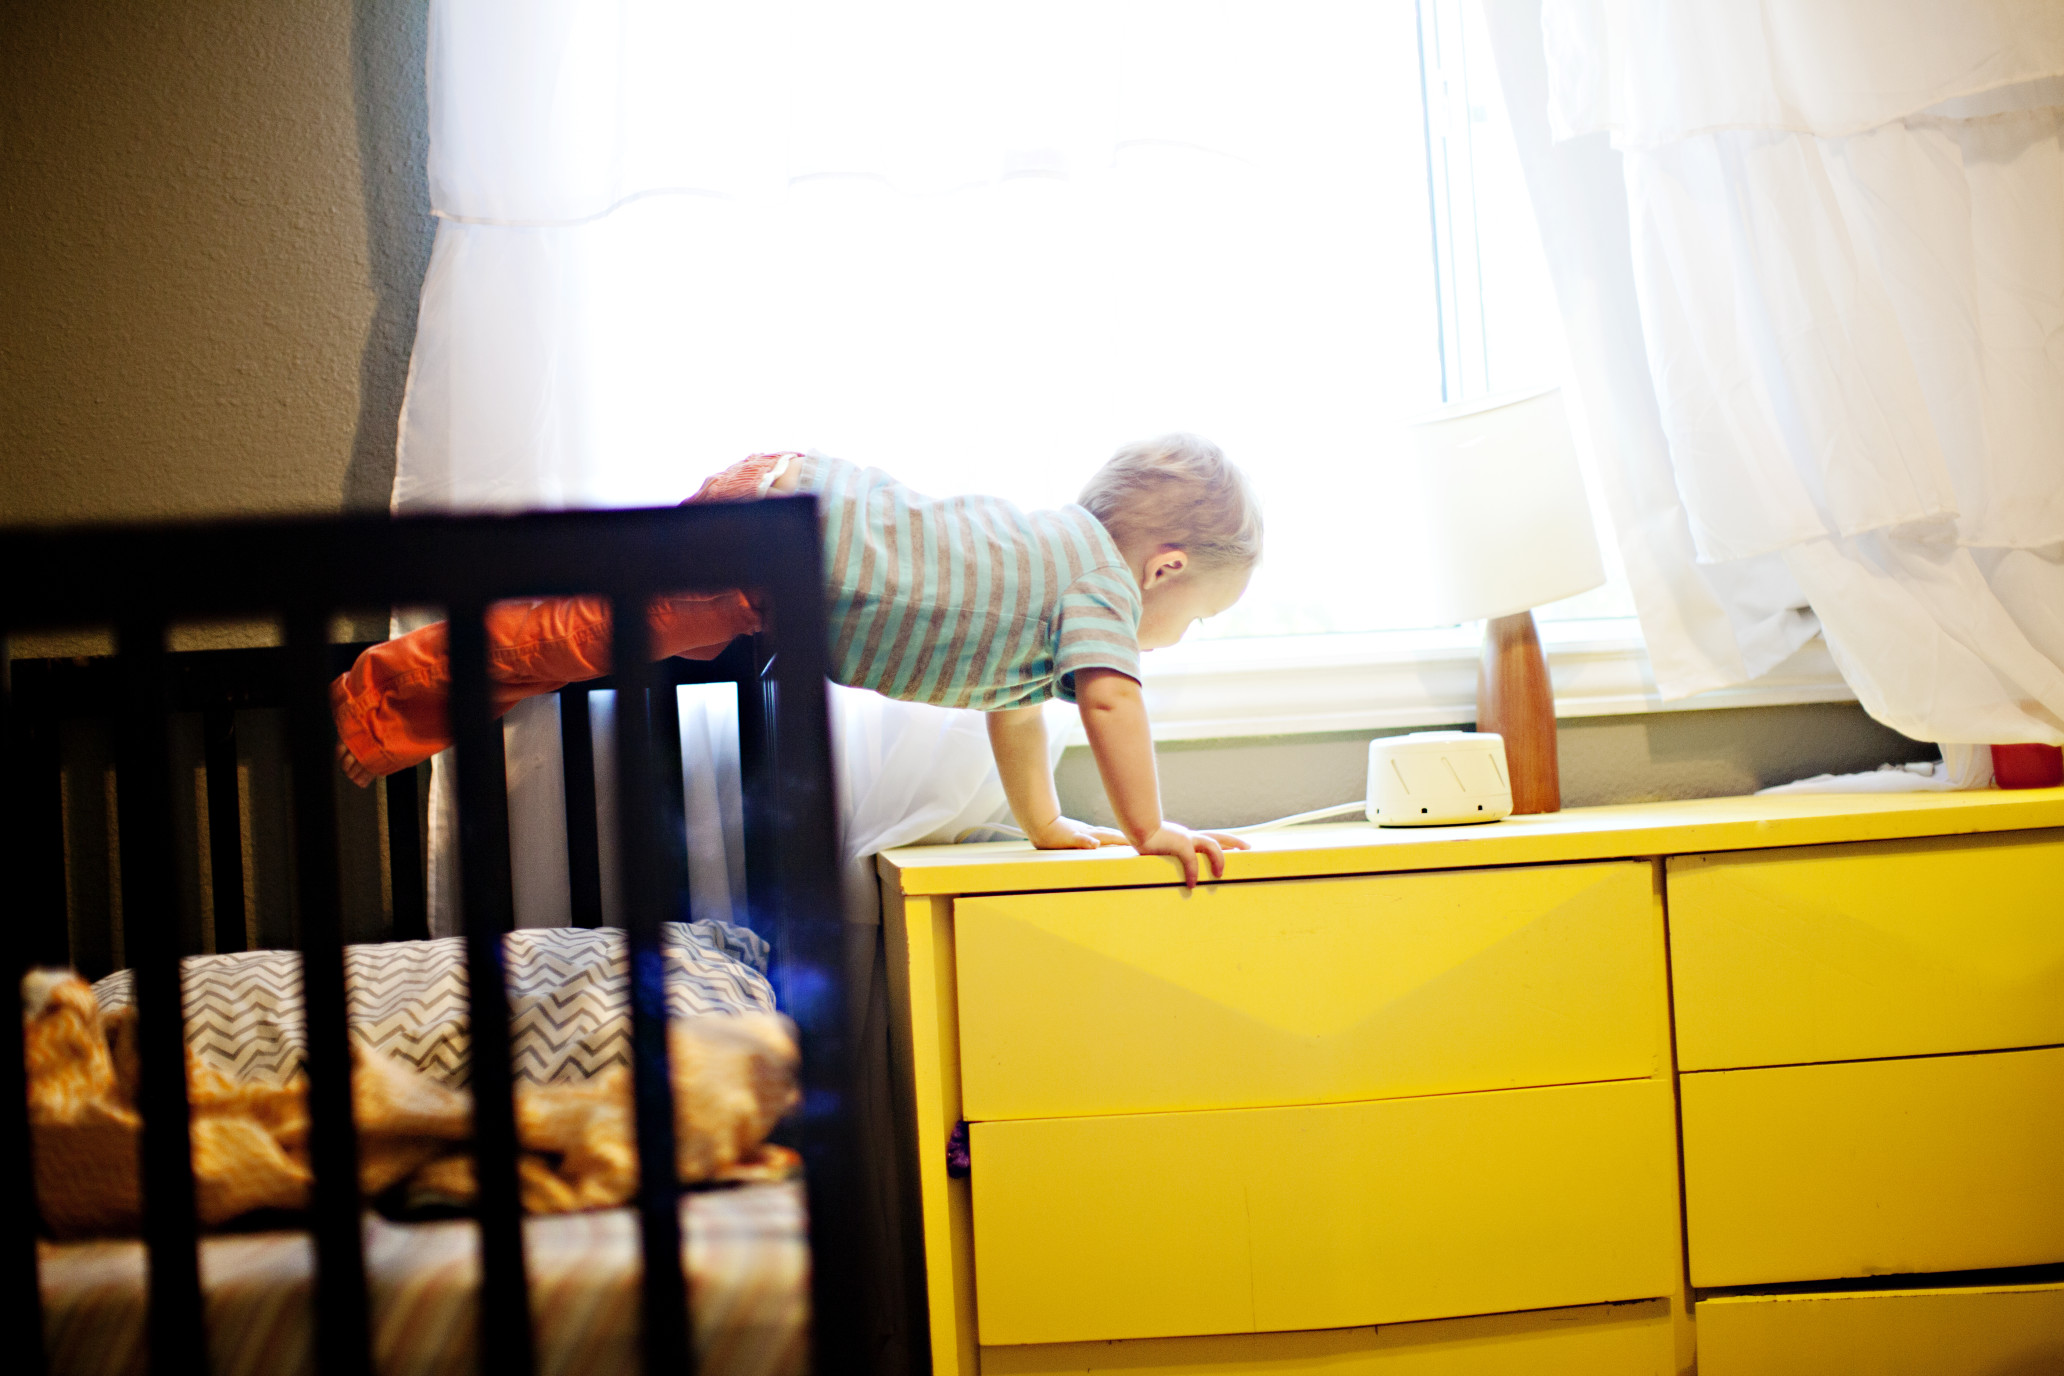 baby escapes from crib backwards